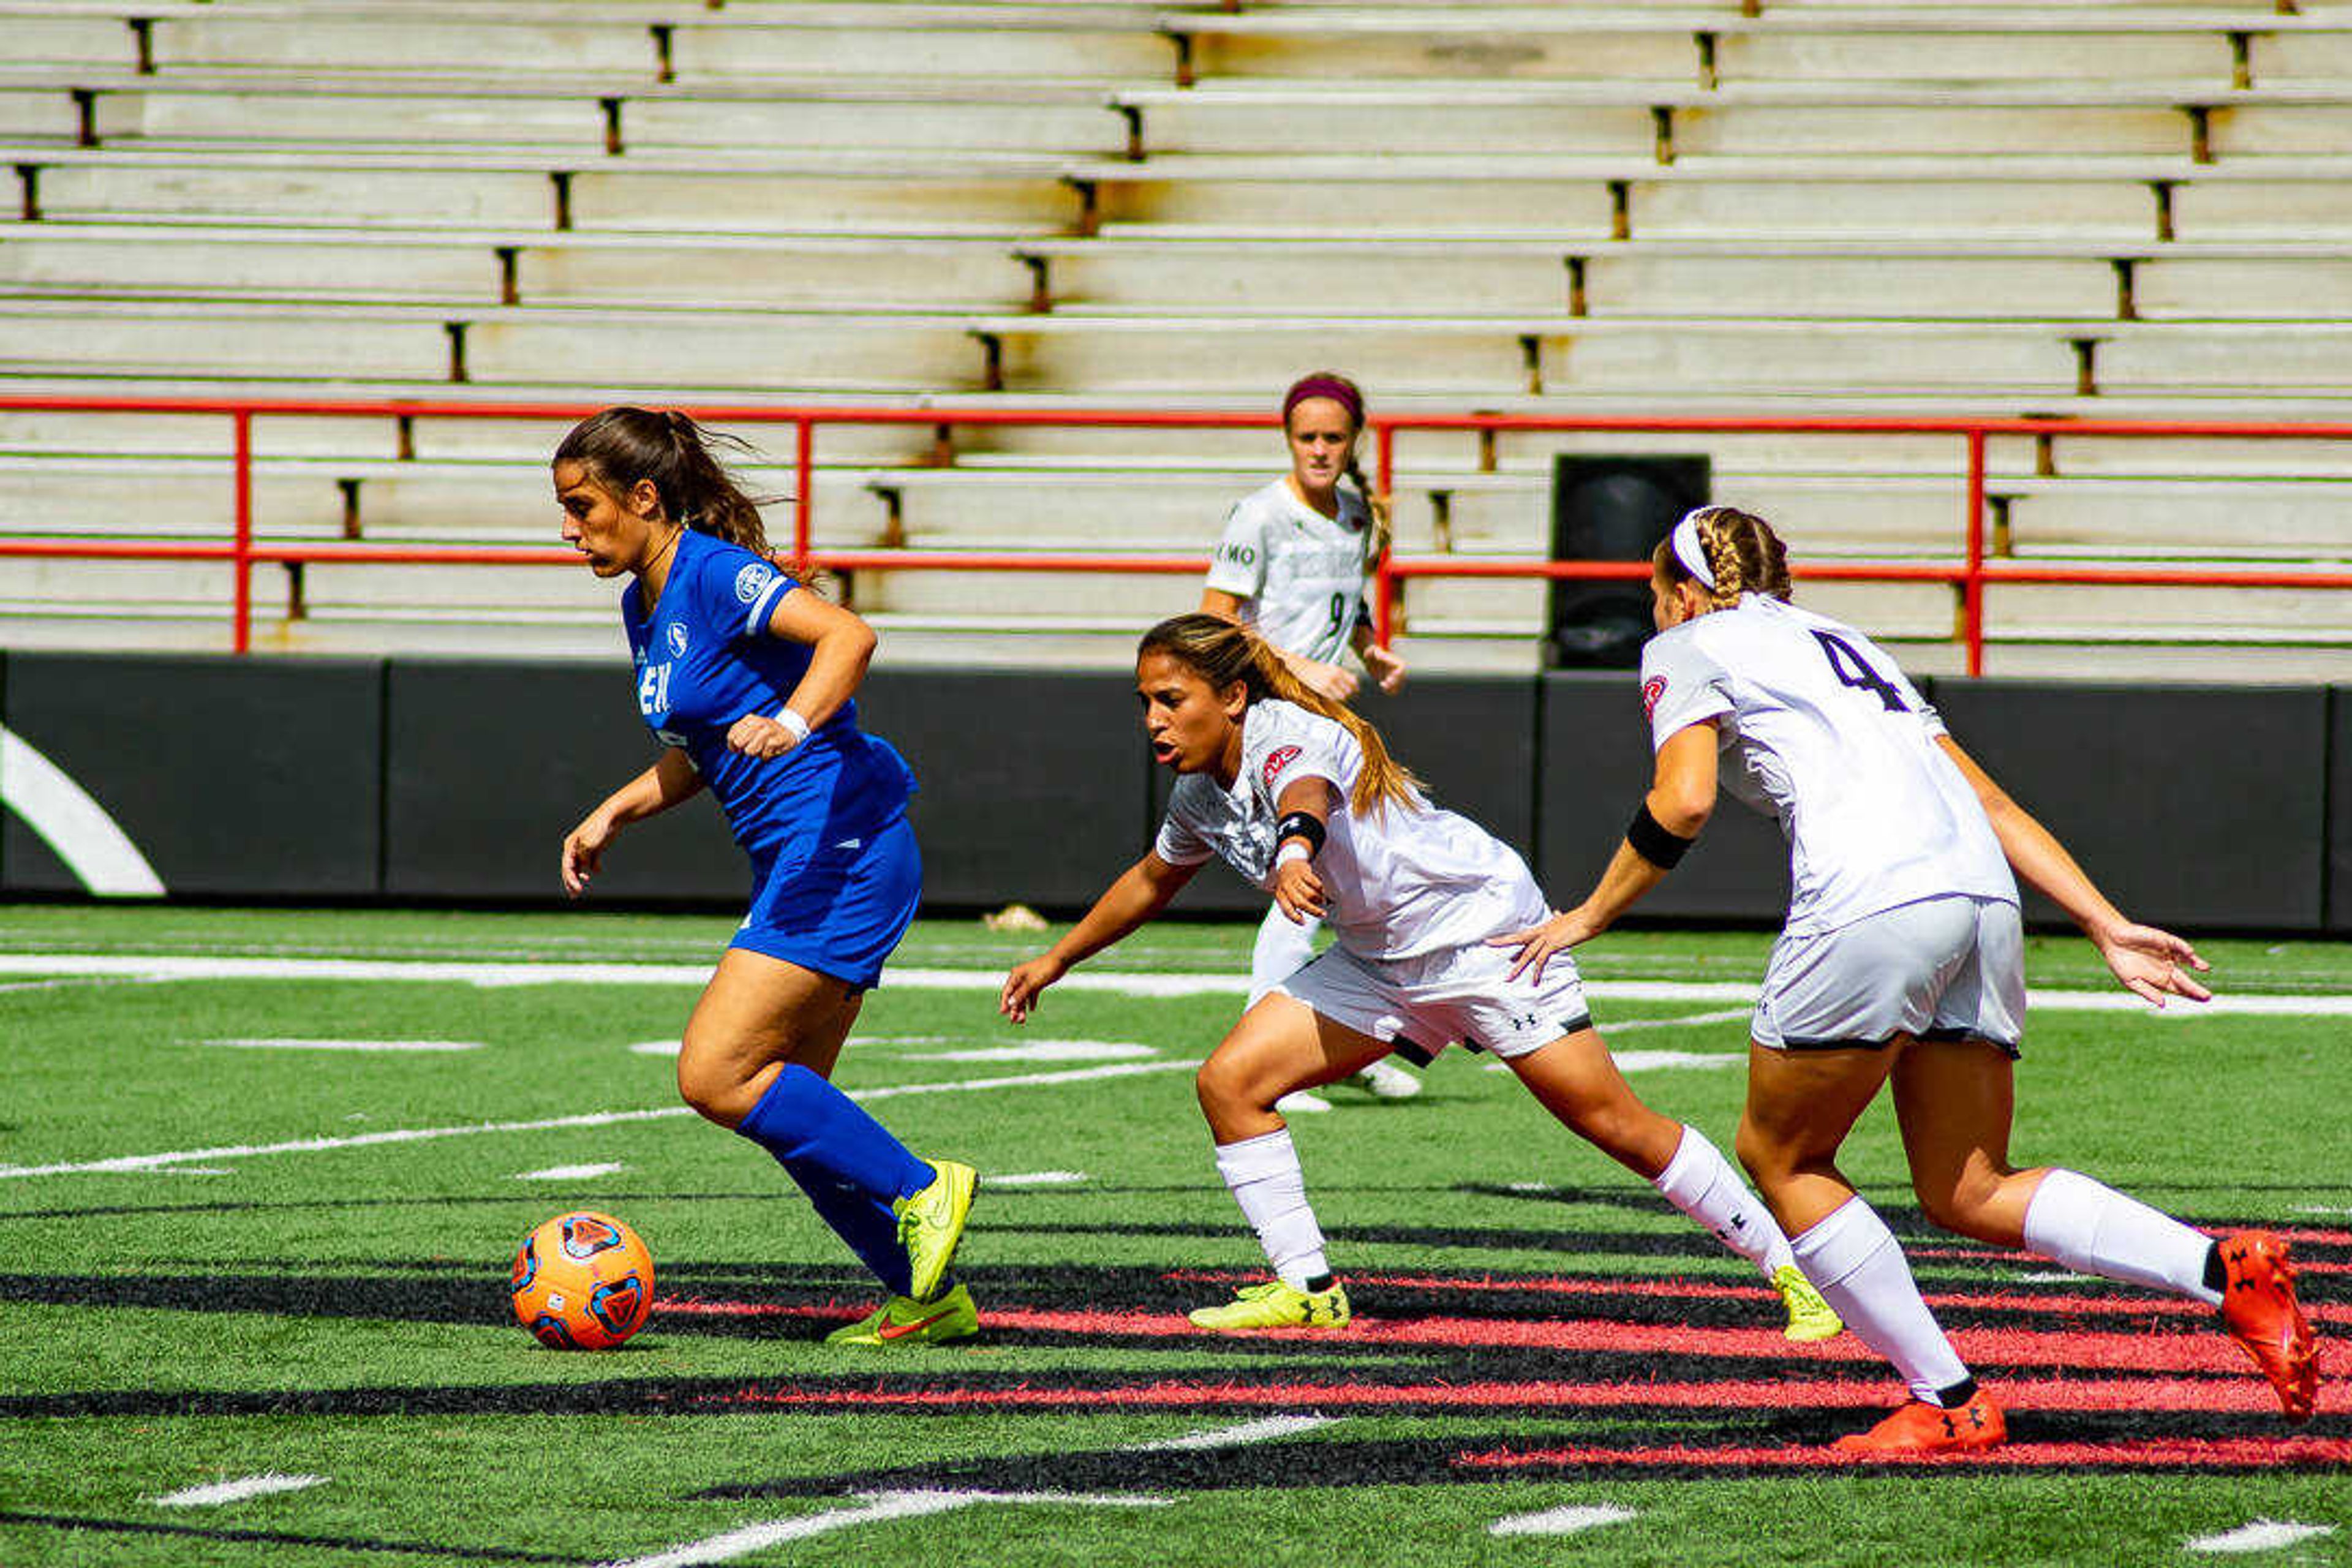 Midfielders Esmie Gonzales (middle) and Hannah Compernolle (right) pursue an Eastern Illinois player, Sept. 22 at Houck Field.